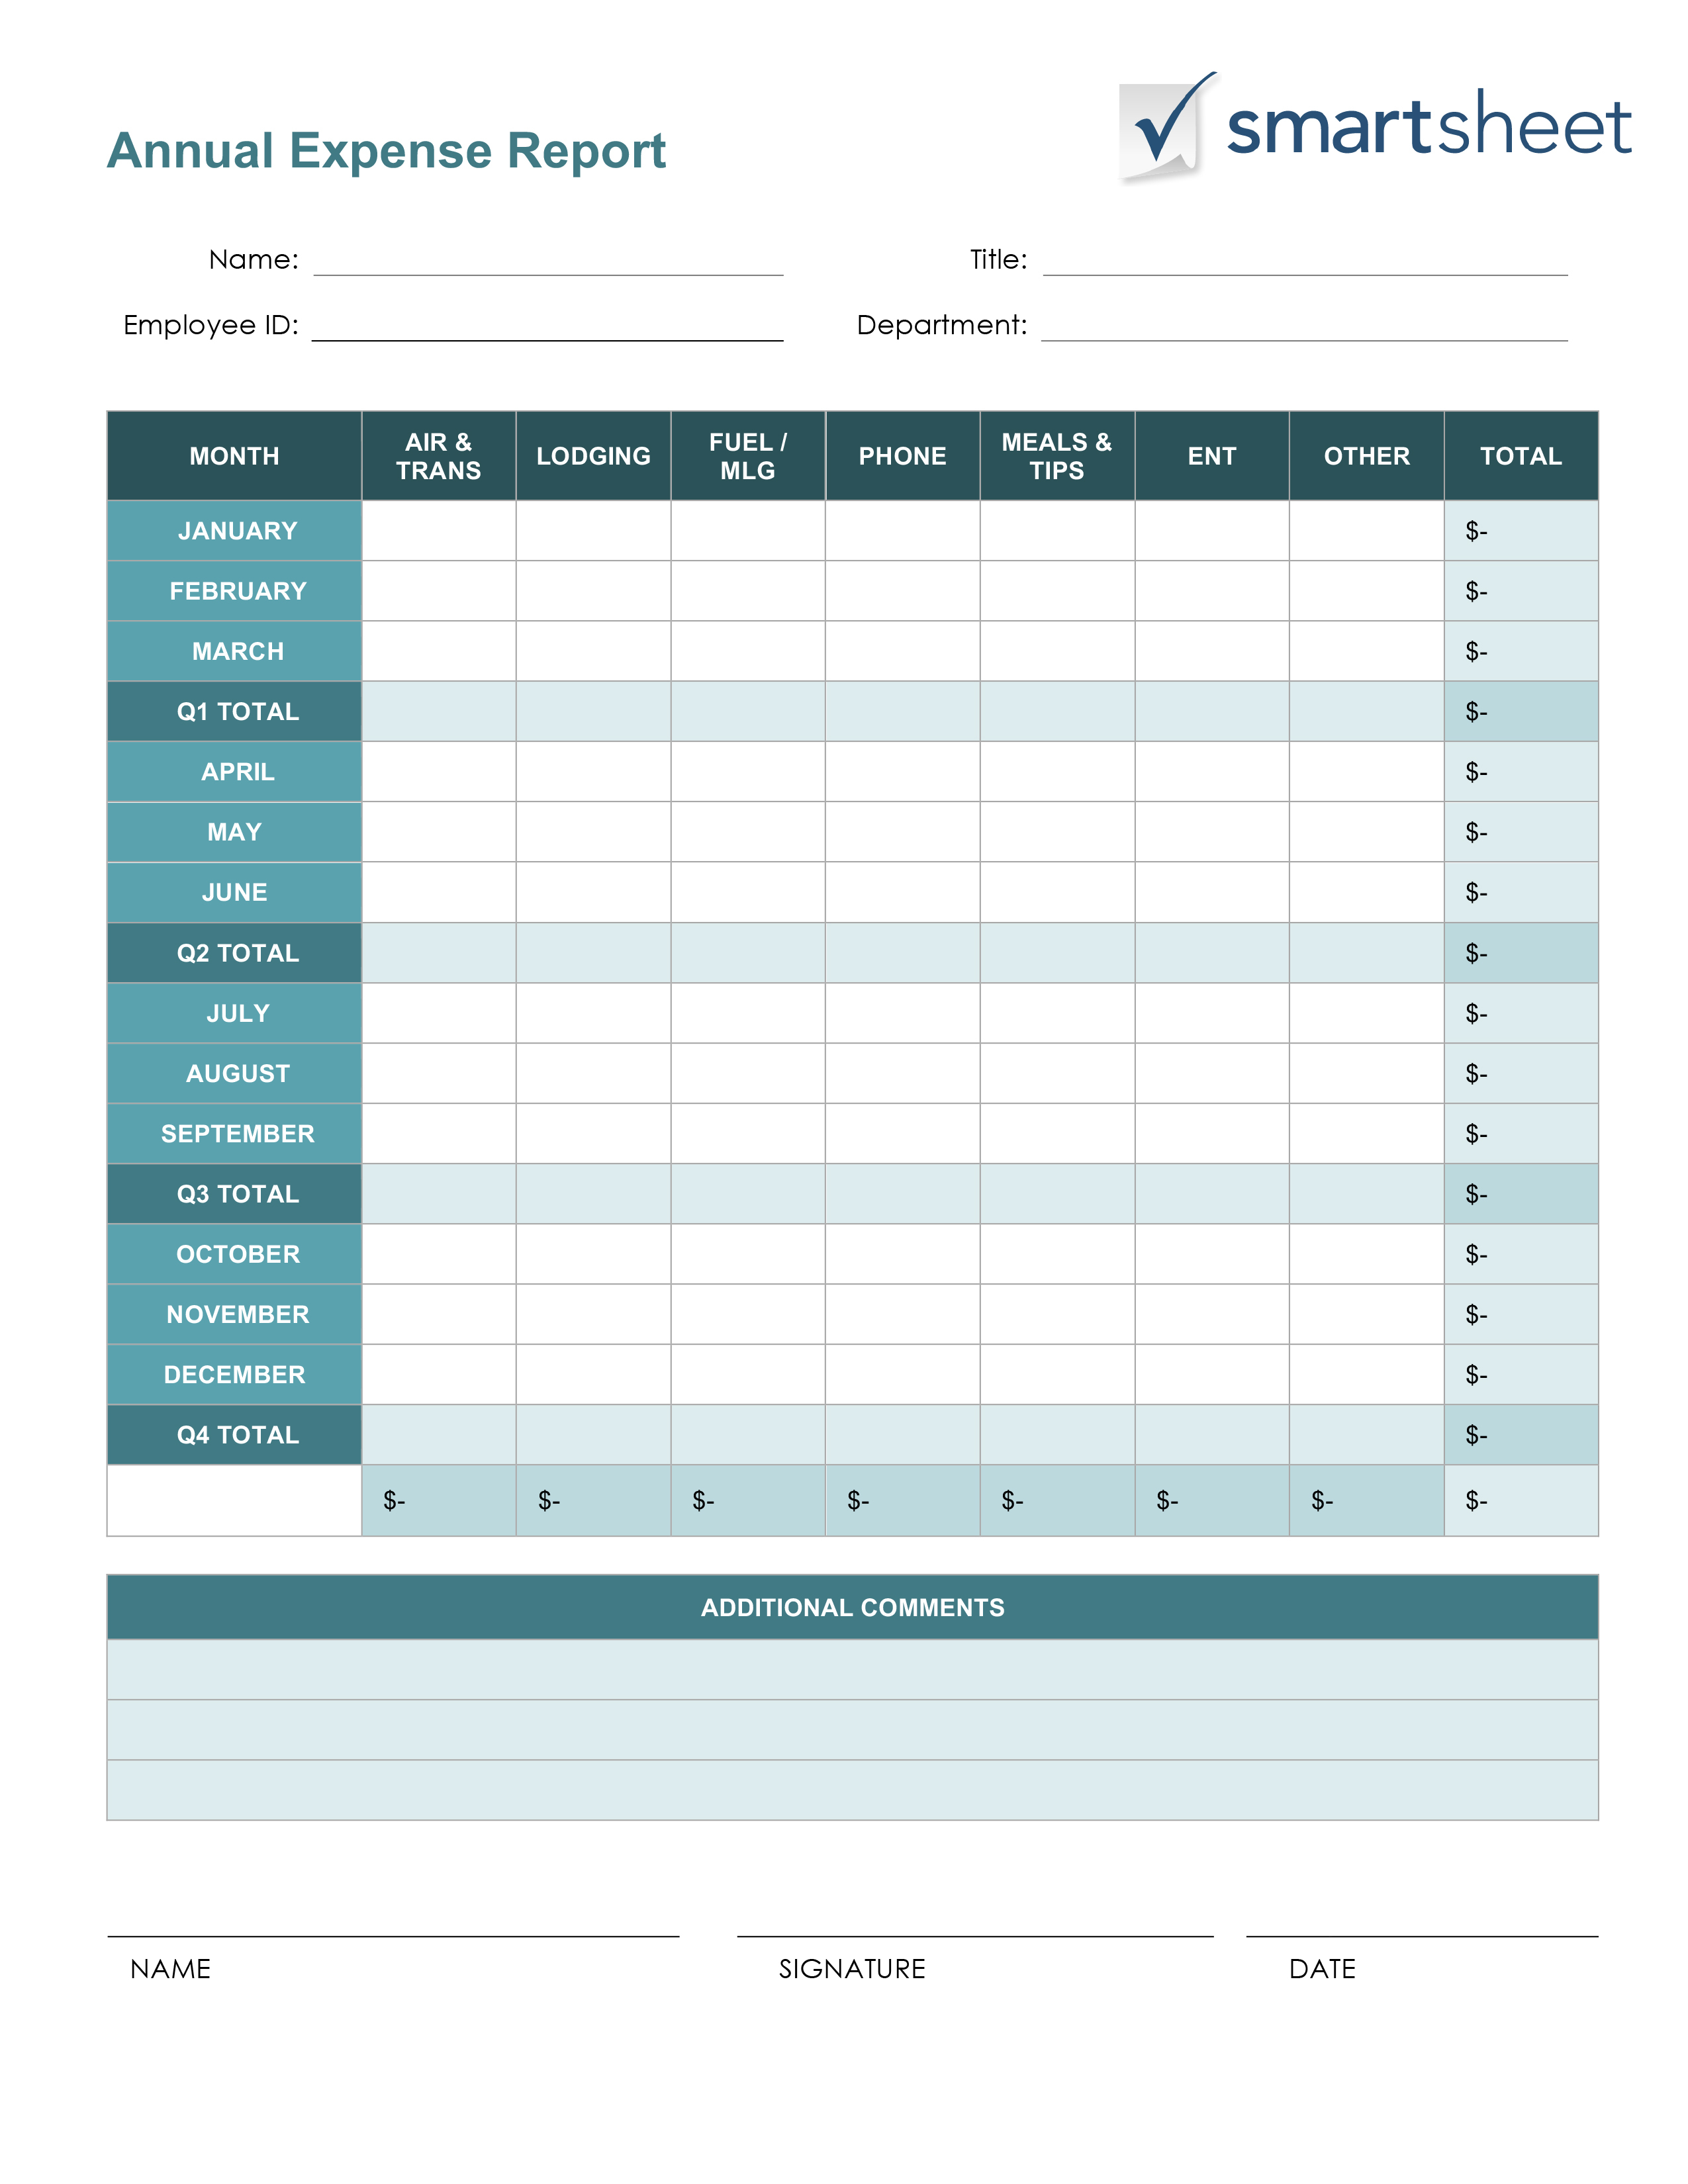 Expense Report Spreadsheet Template Free In Monthly Expense Report Template Charlotte Clergy Coalition Ms Excel